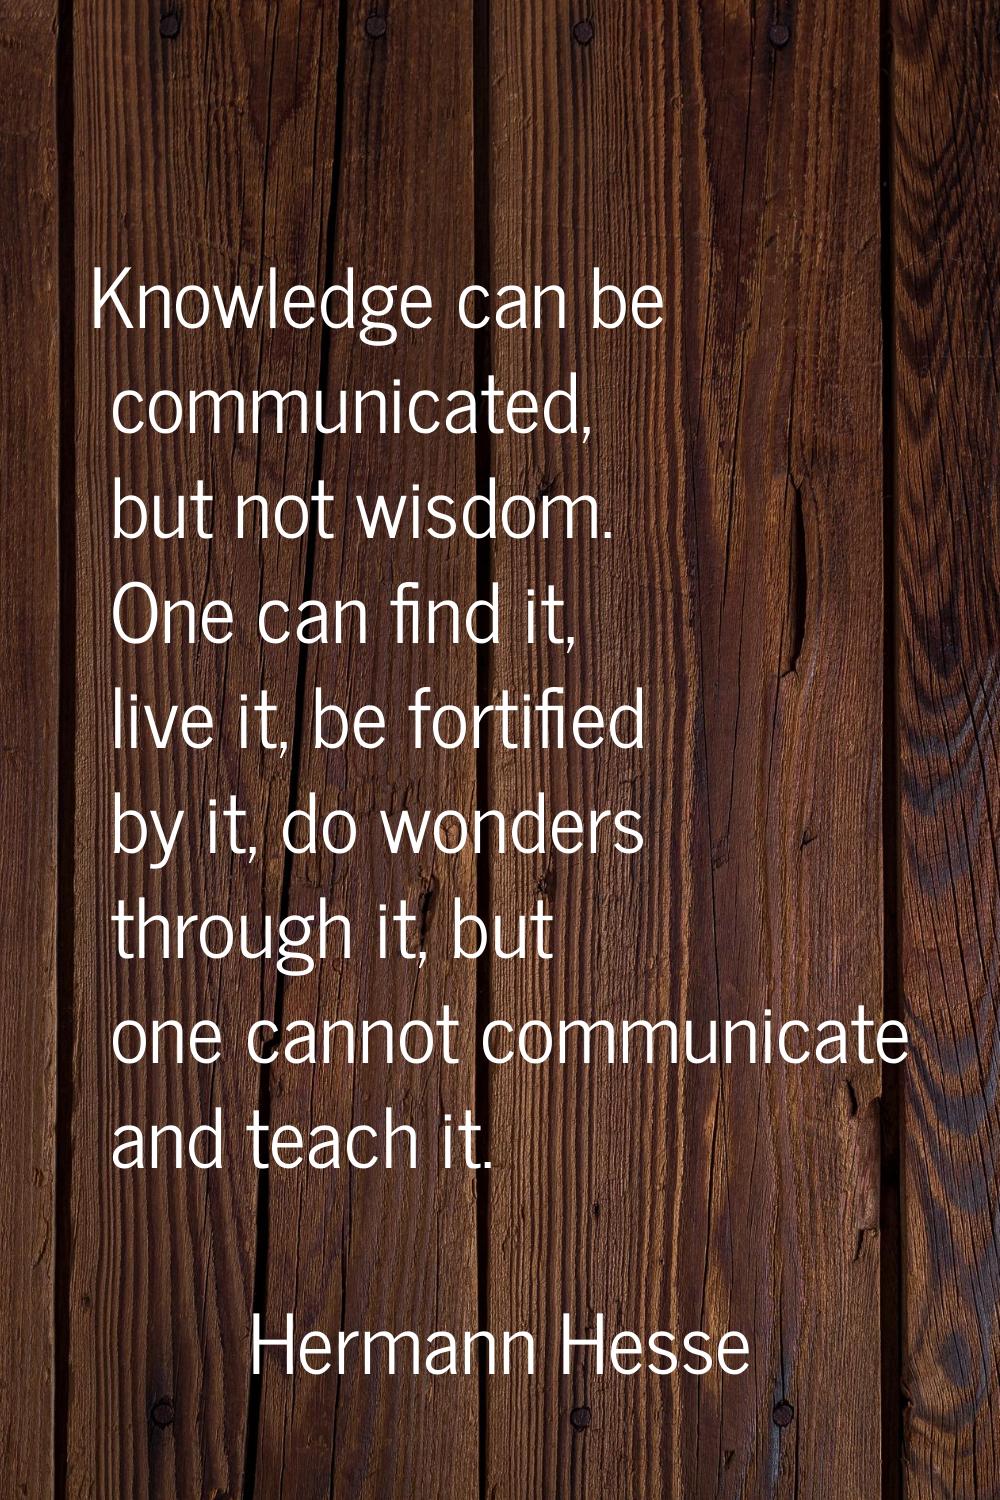 Knowledge can be communicated, but not wisdom. One can find it, live it, be fortified by it, do won